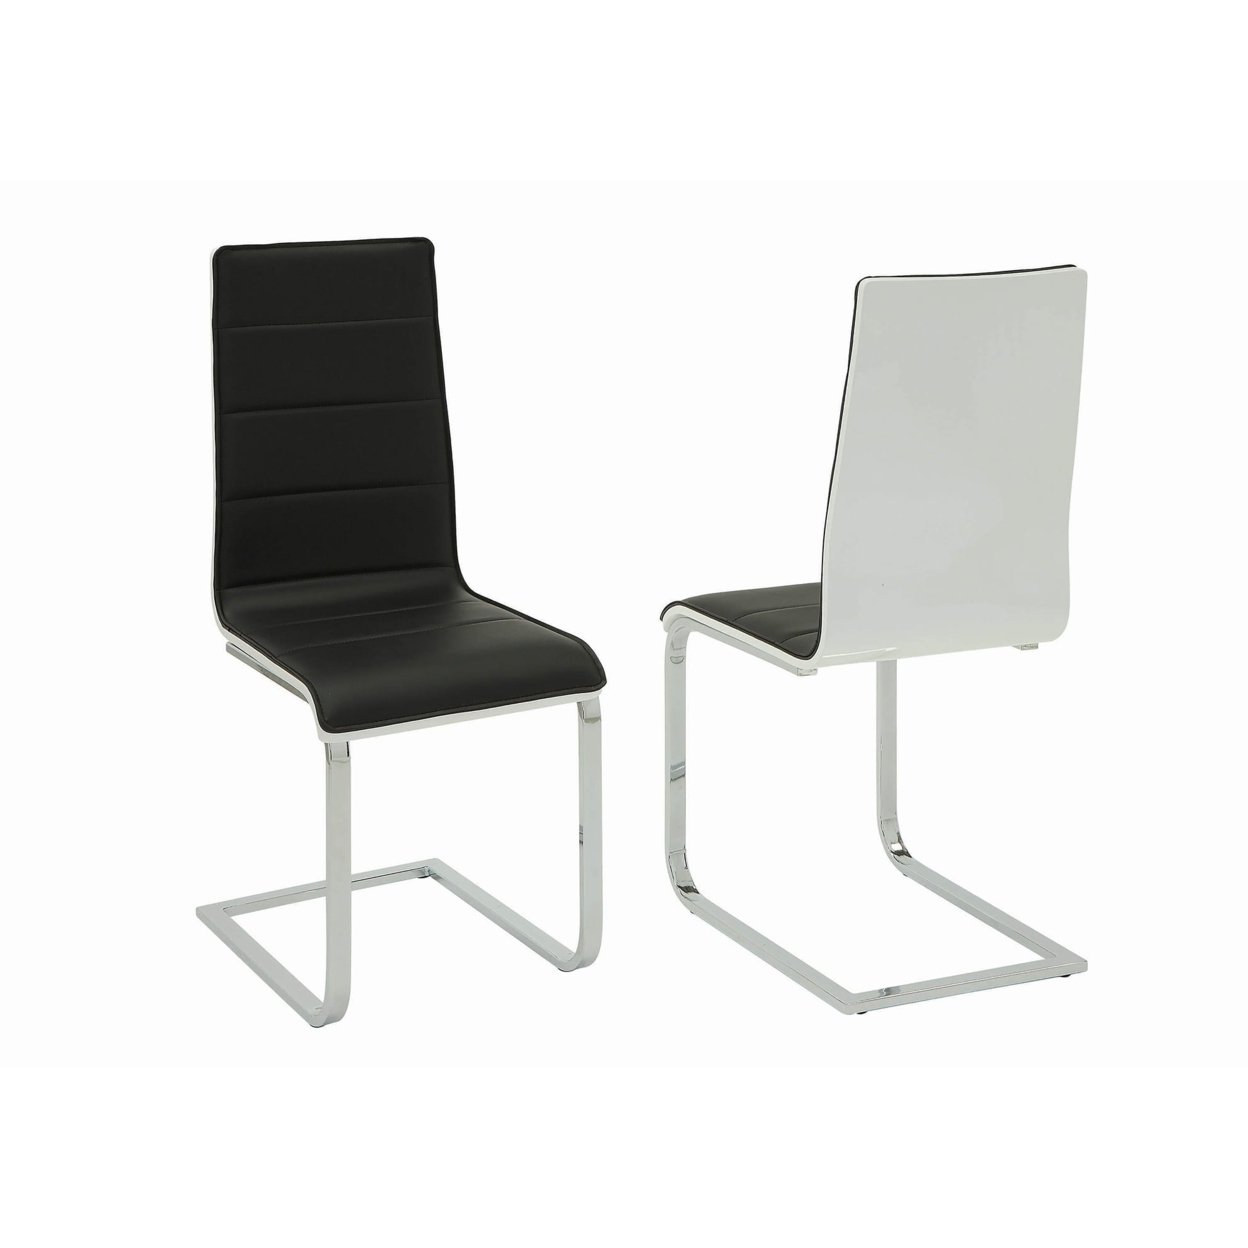 Metal Dining Chairs With Cantilever Design, Set Of 2, White And Black- Saltoro Sherpi